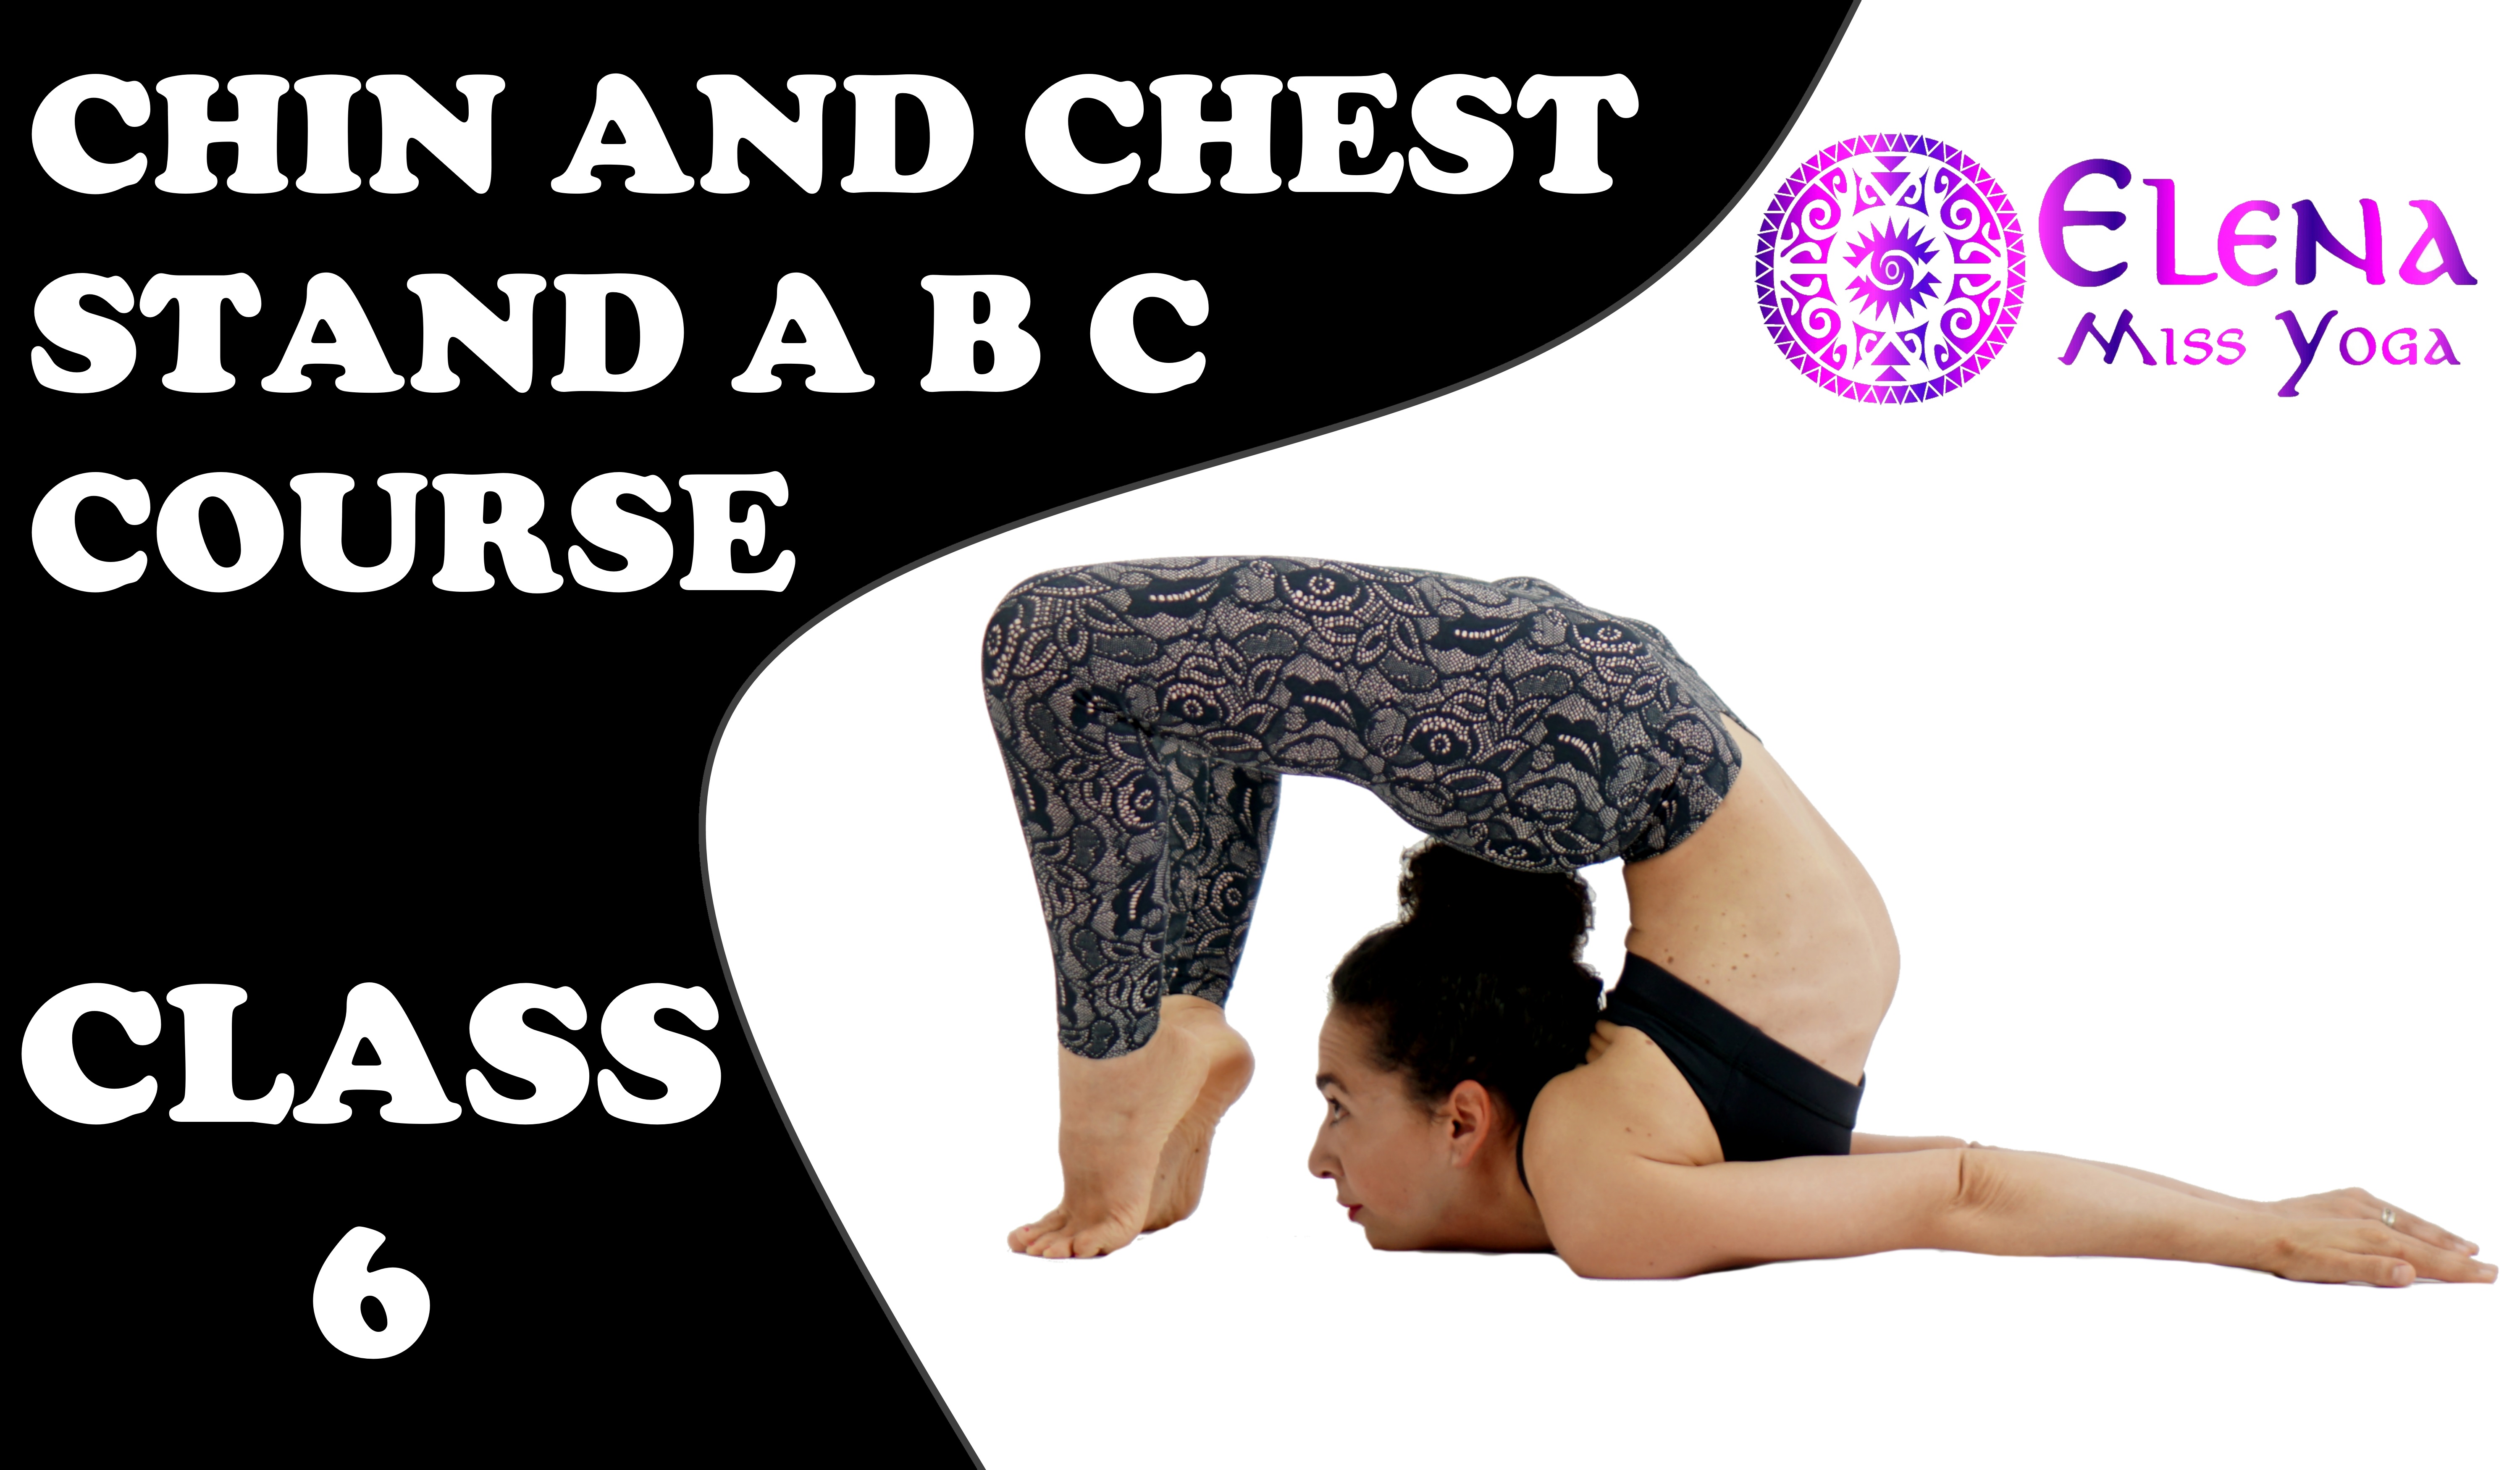 CHIN AND CHEST STAND A B C COURSE - CLASS NO. 6